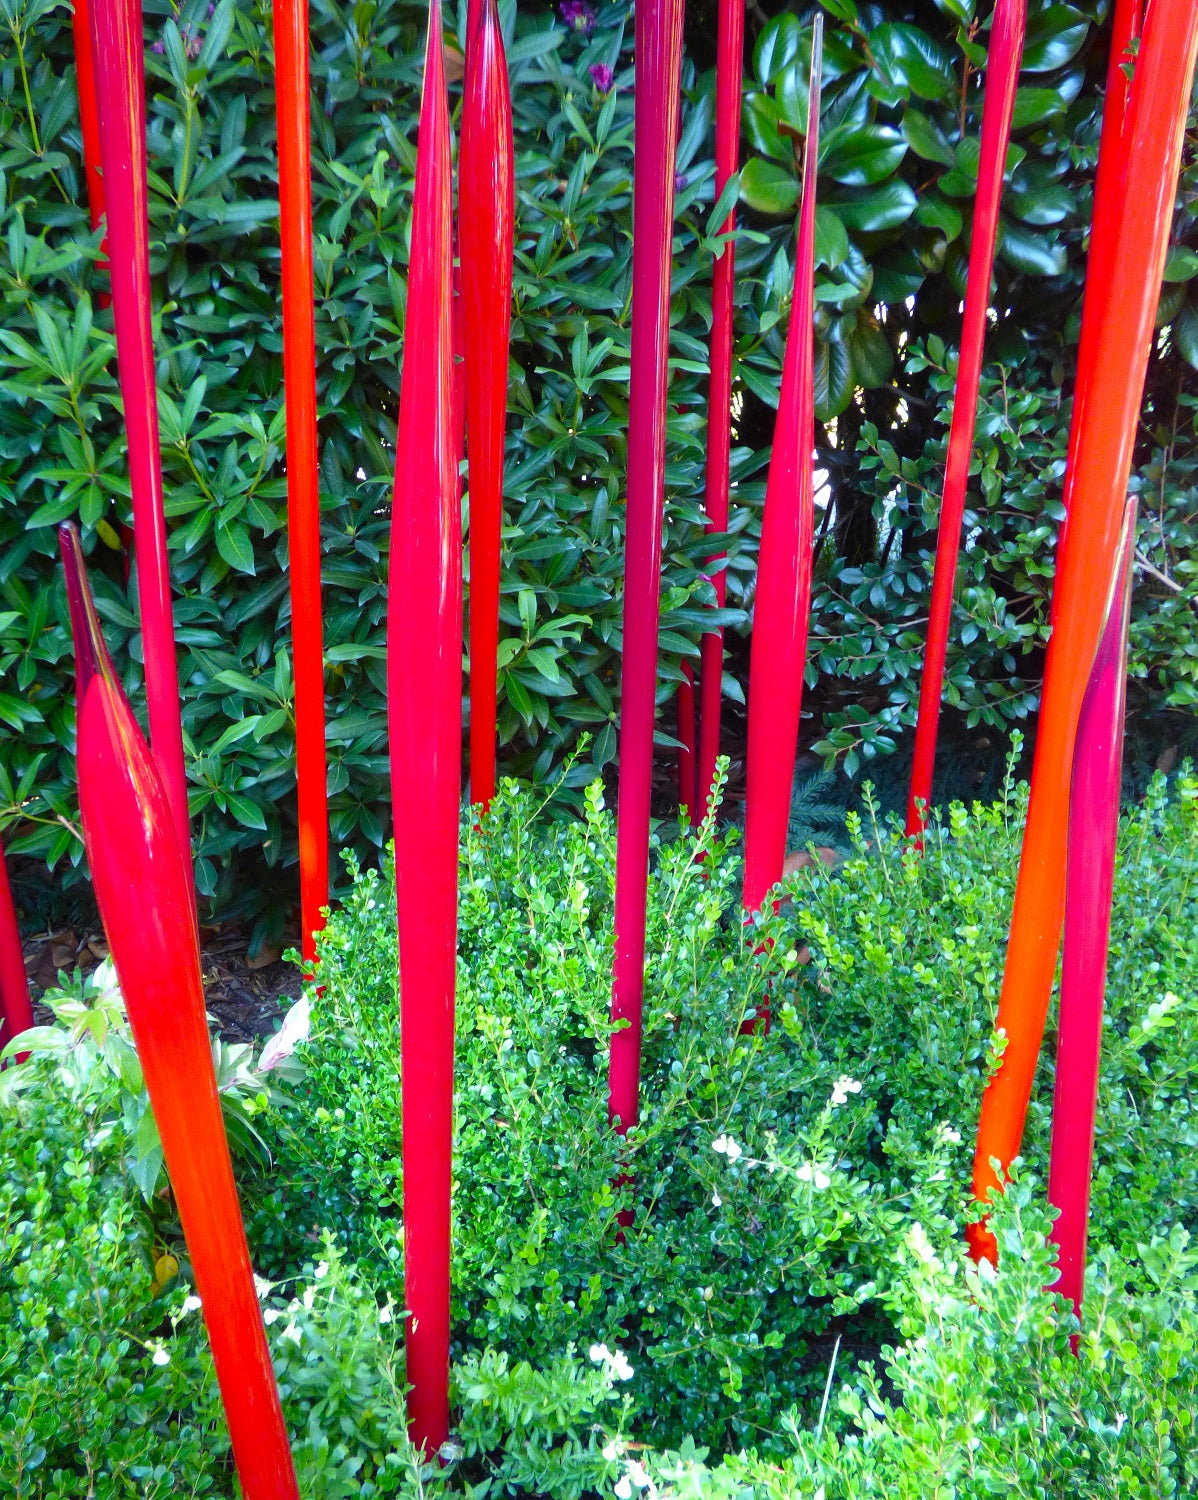 Red glass reeds in boxwoods at Chihuly garden and glass